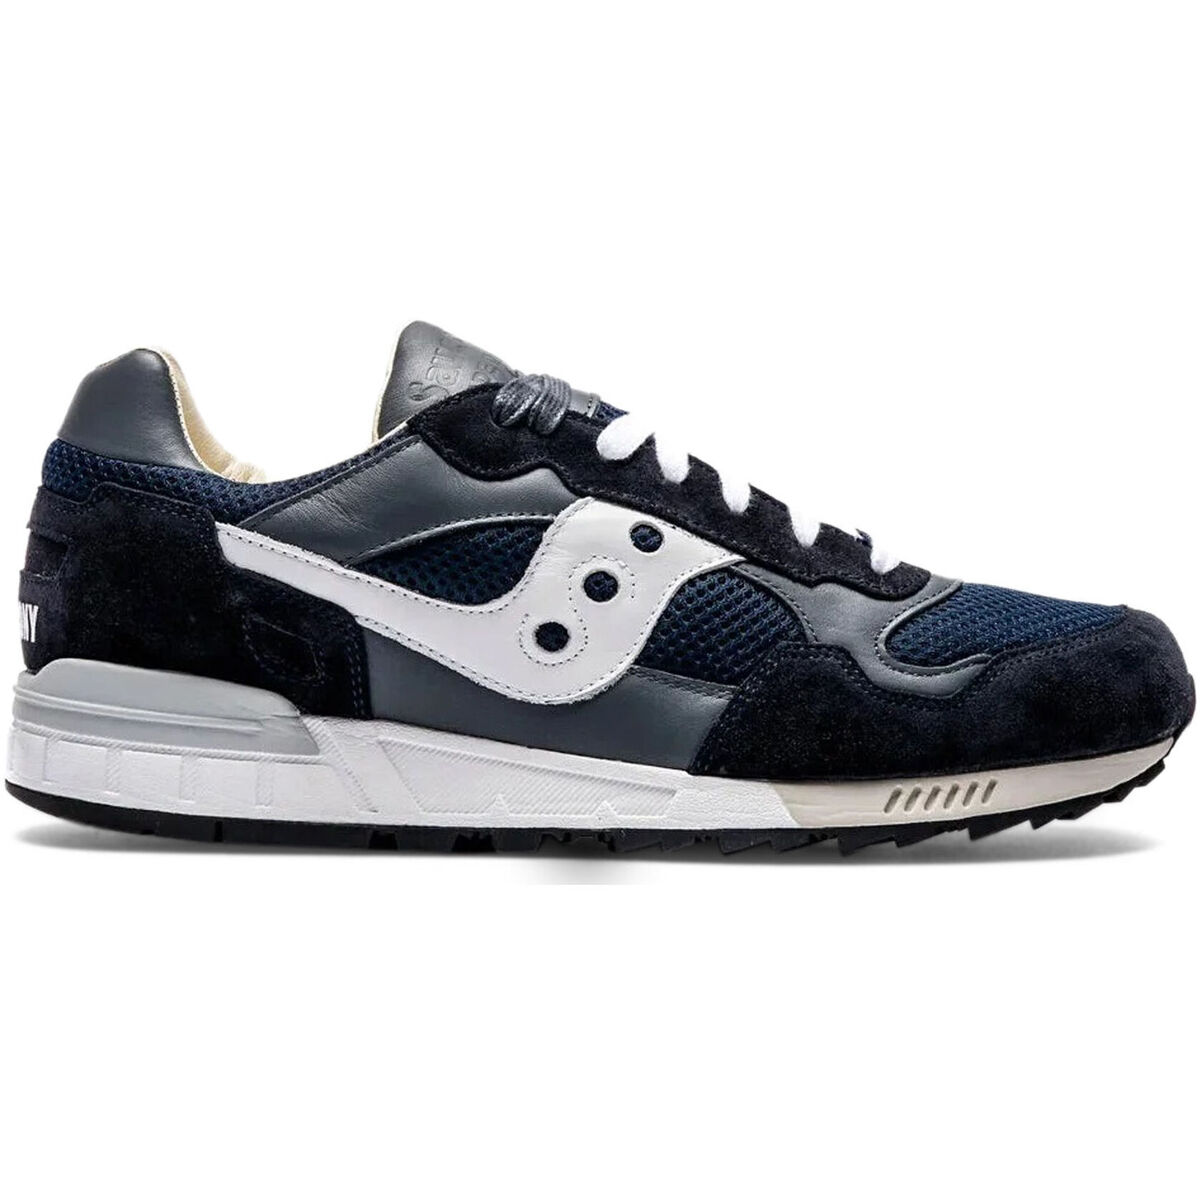 Chaussures Femme Vibrant Hues Land on the Saucony Grid SD 'Light Tan' - shadow-5000_s707 Bleu